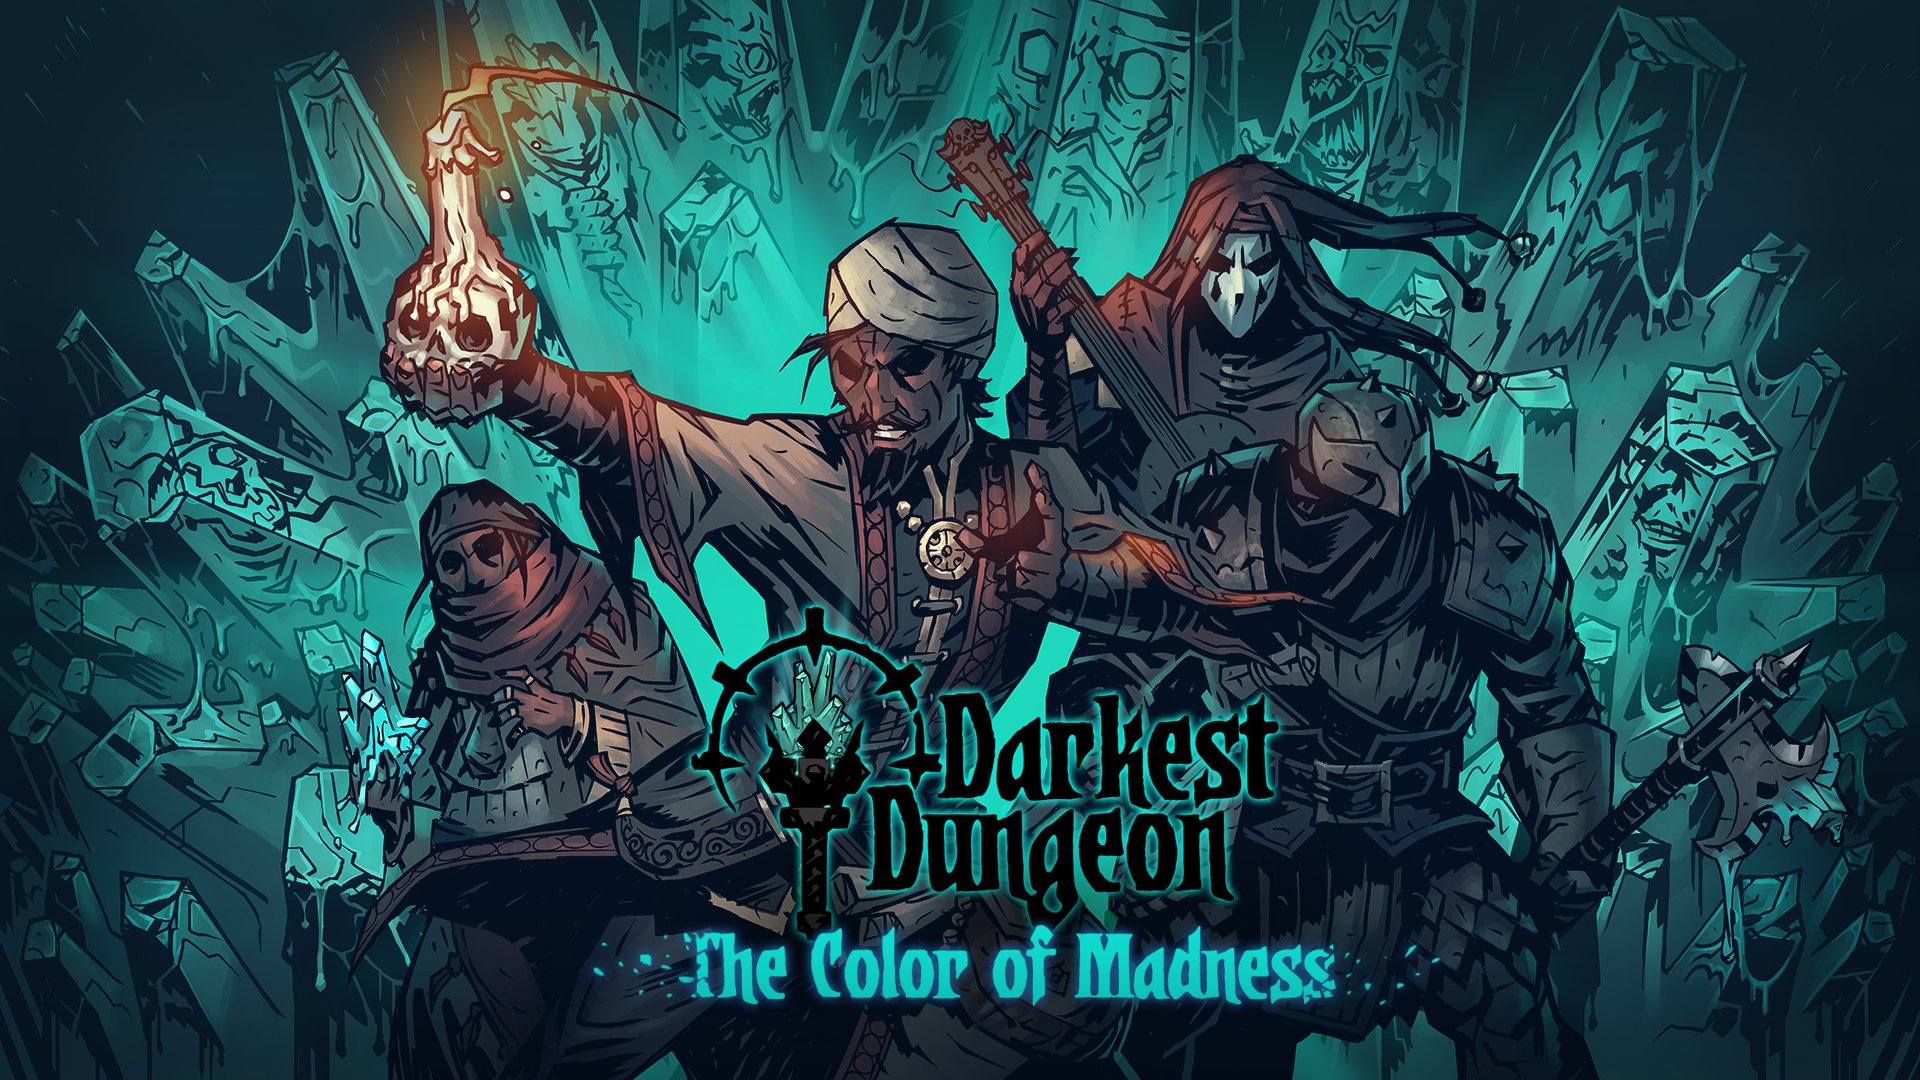 ESD Darkest Dungeon The Color of Madness 